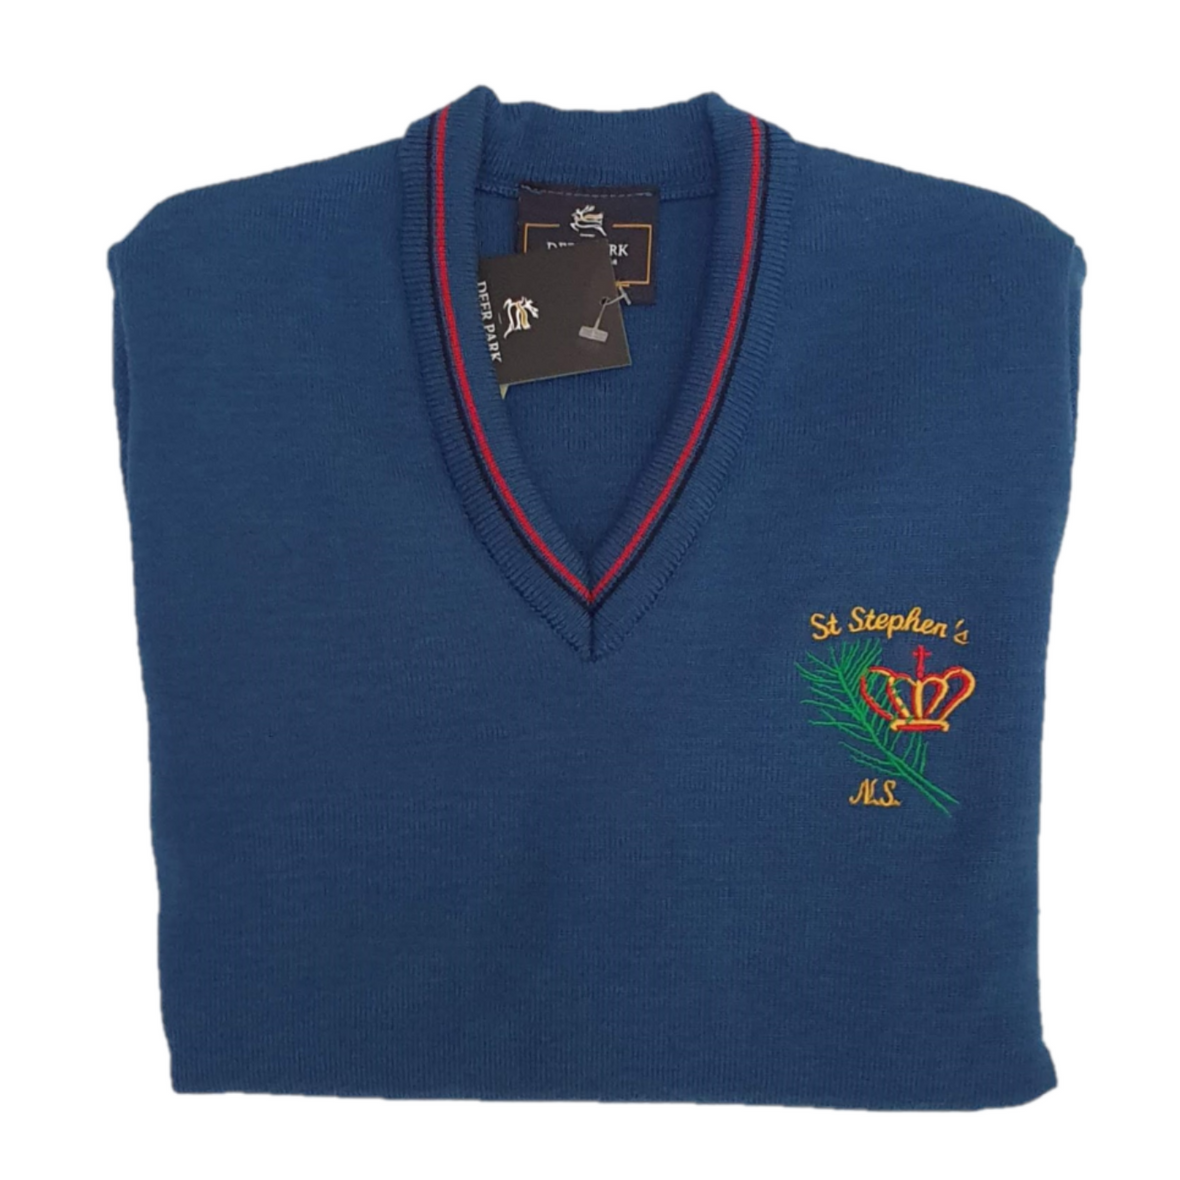 St Stephens National School Crested Jumper - Acrylic